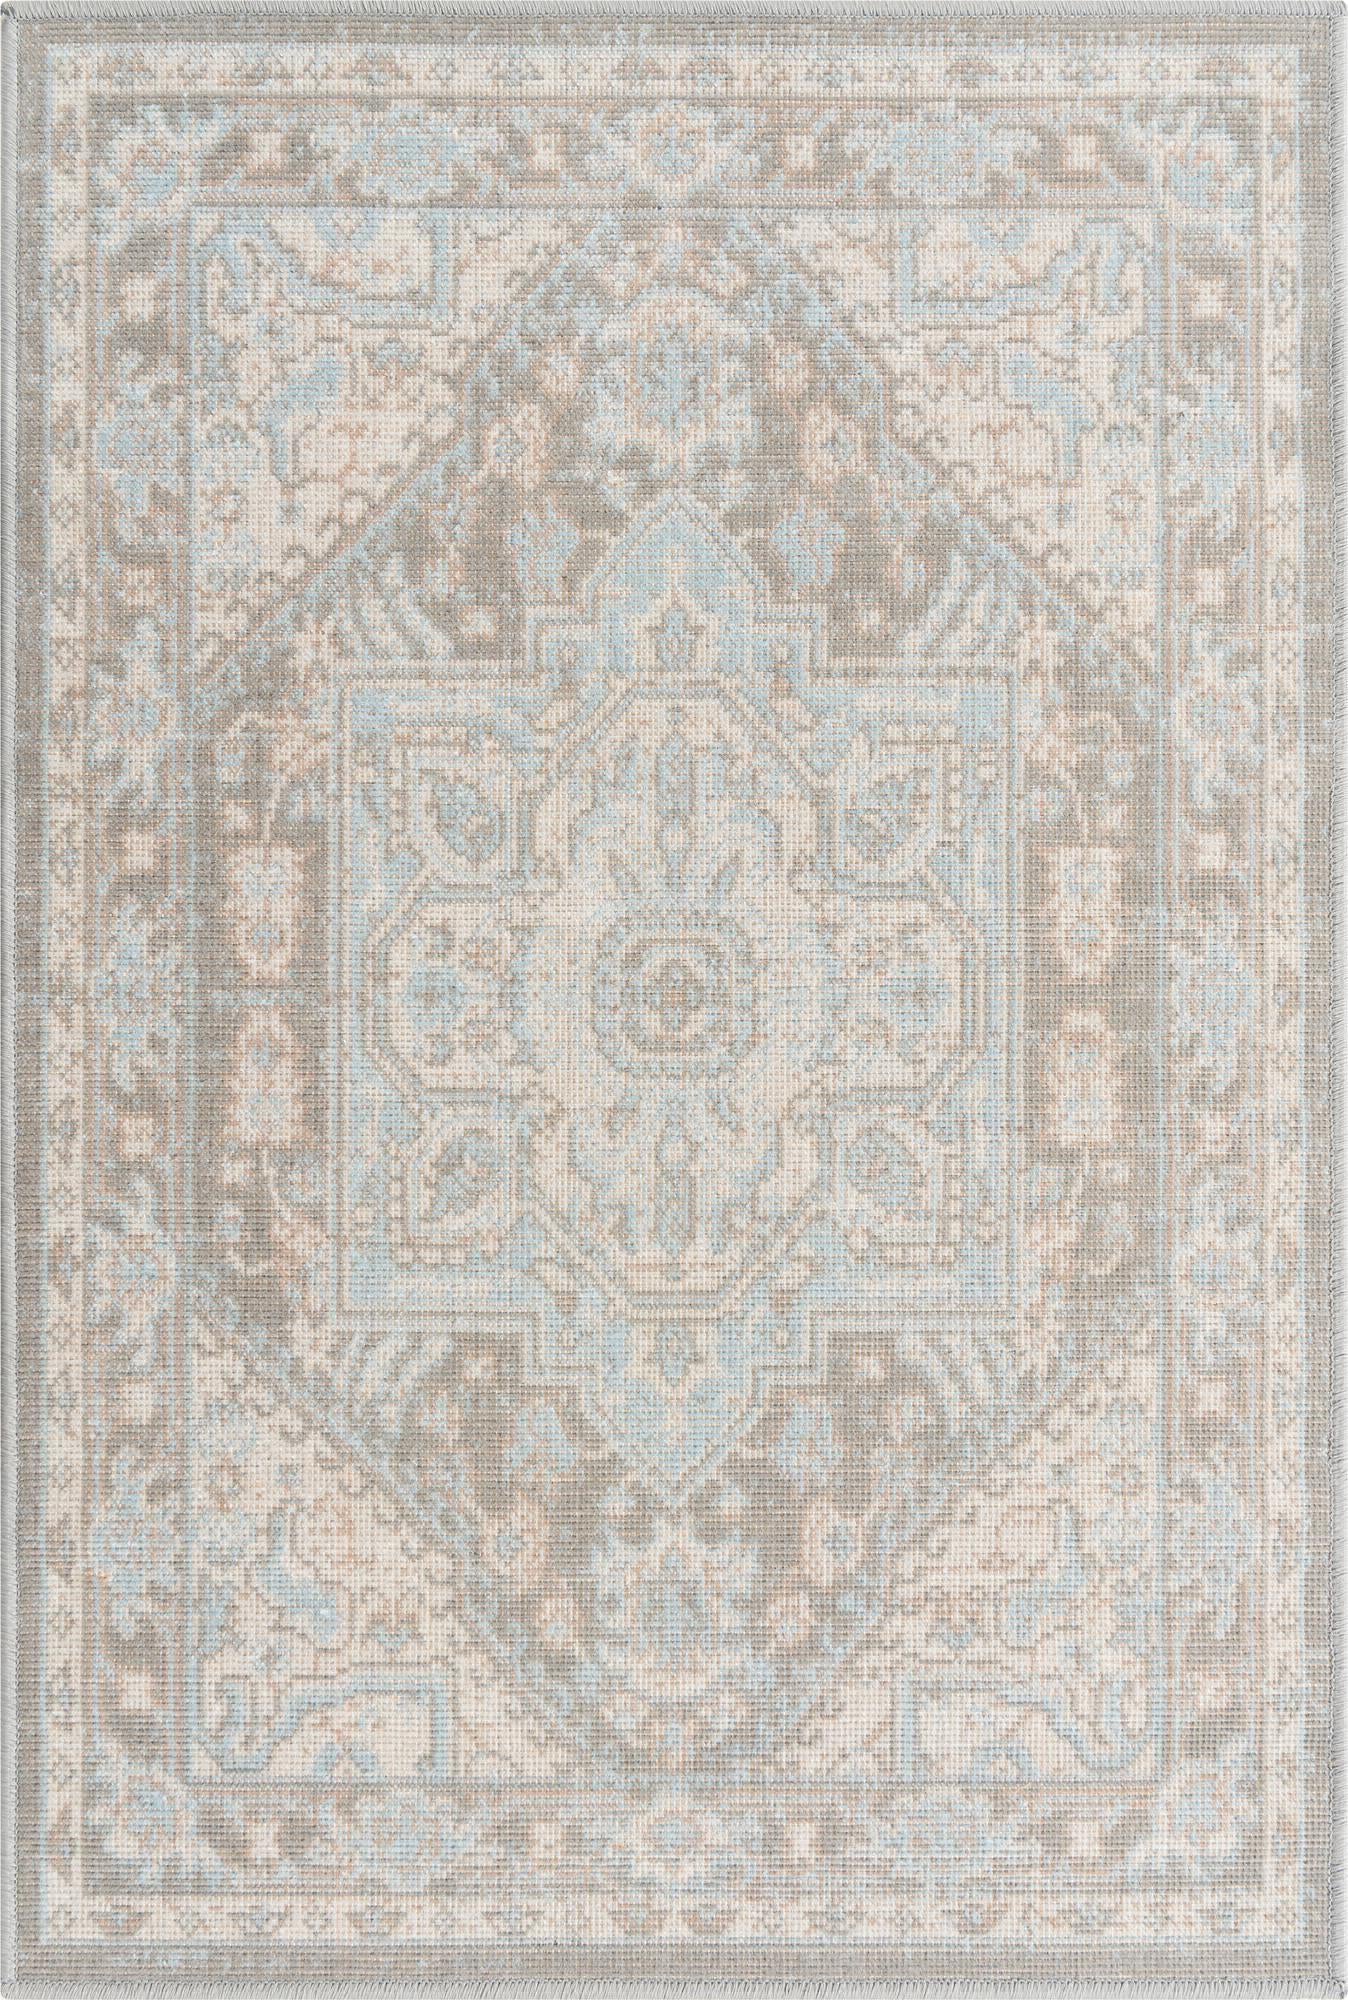 Unique Loom Whitney T-WHIT1 Cloud Gray Area Rug main image